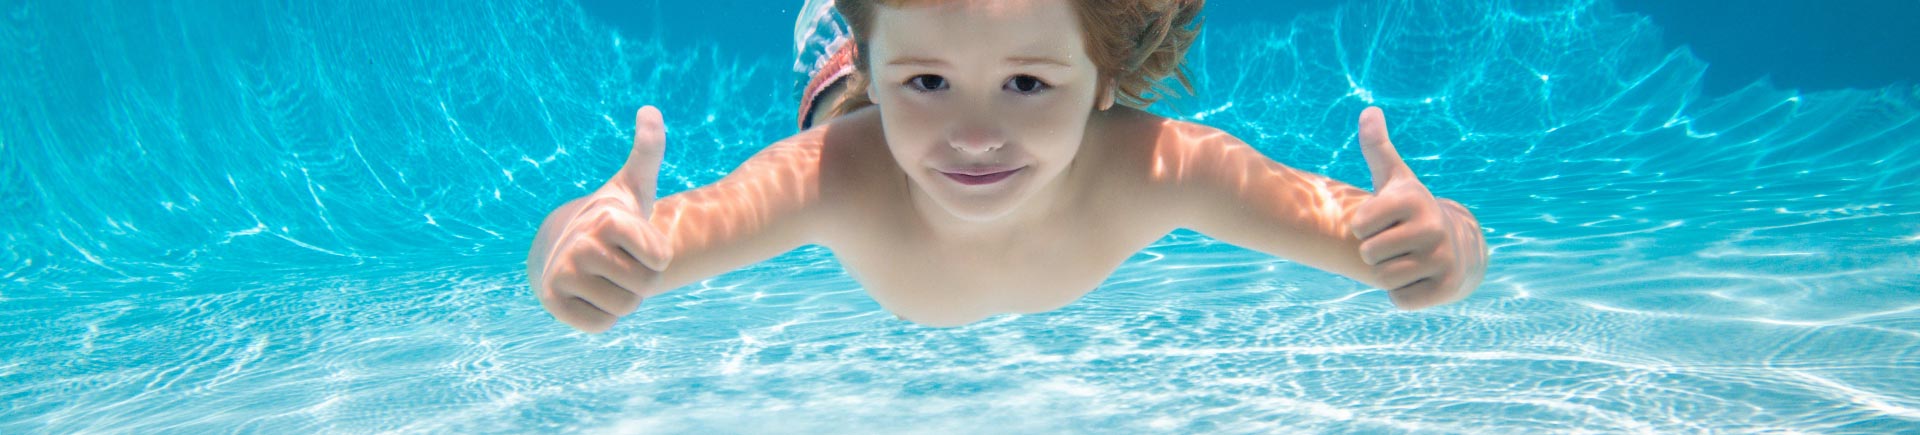 Child swimming underwater with thumbs up